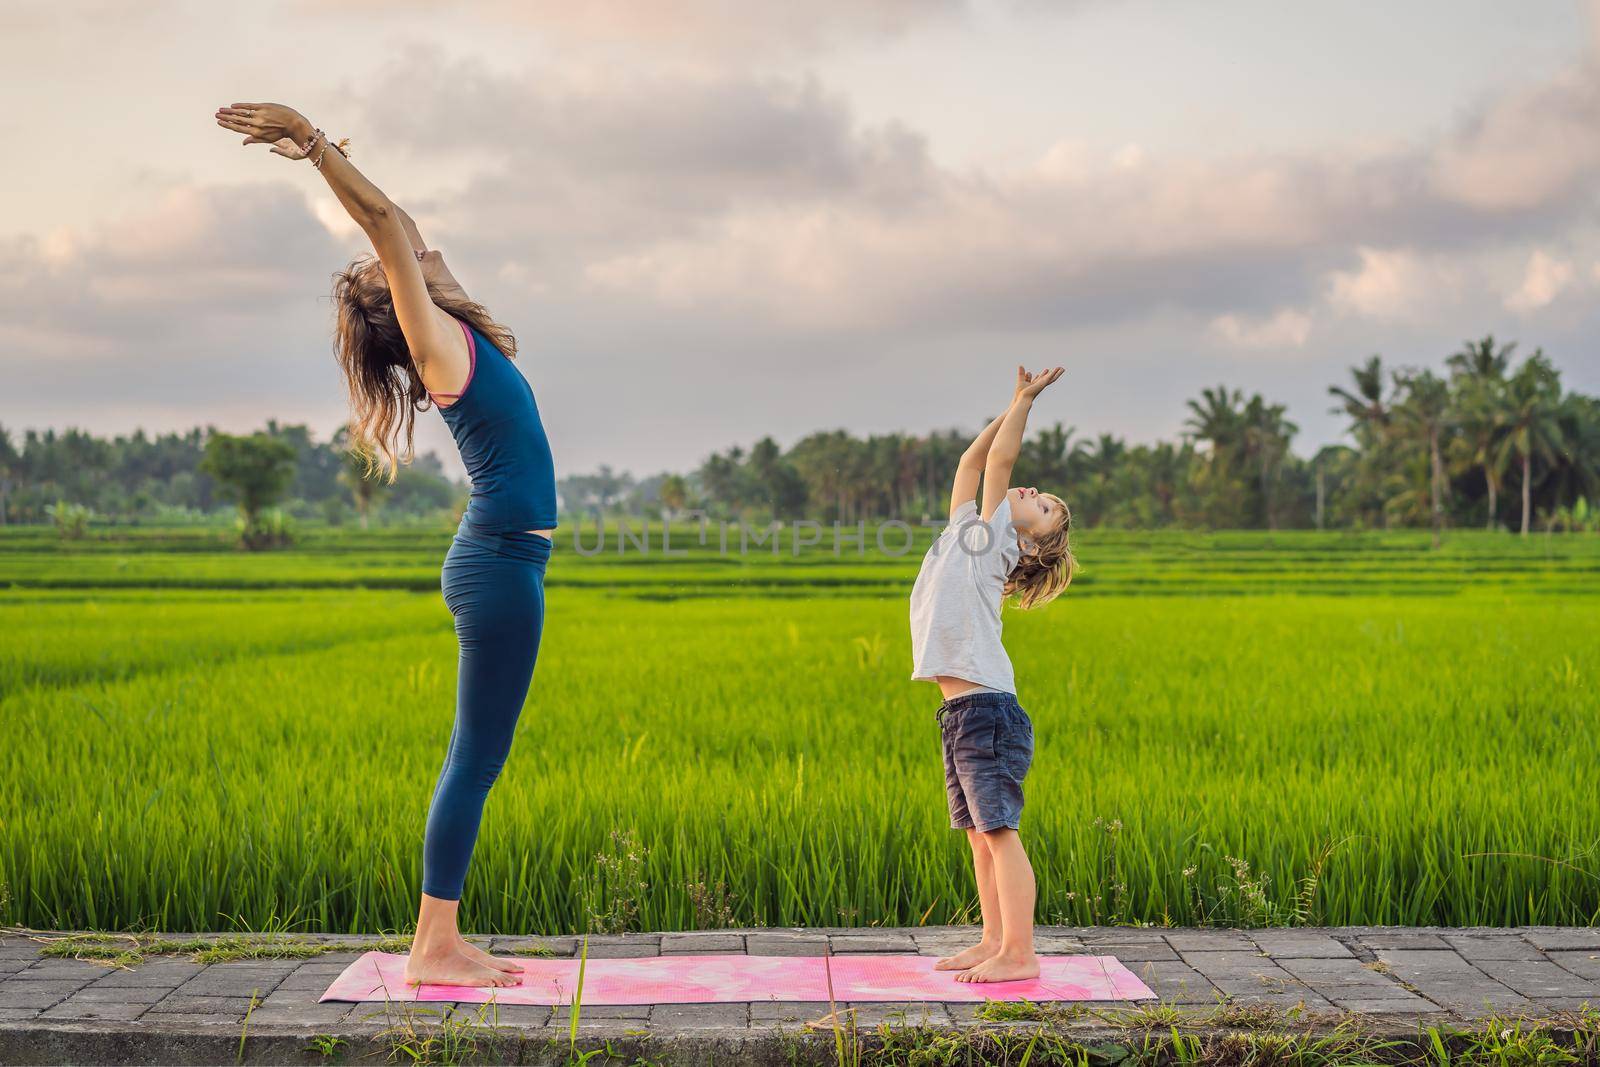 Boy and his yoga teacher doing yoga in a rice field.